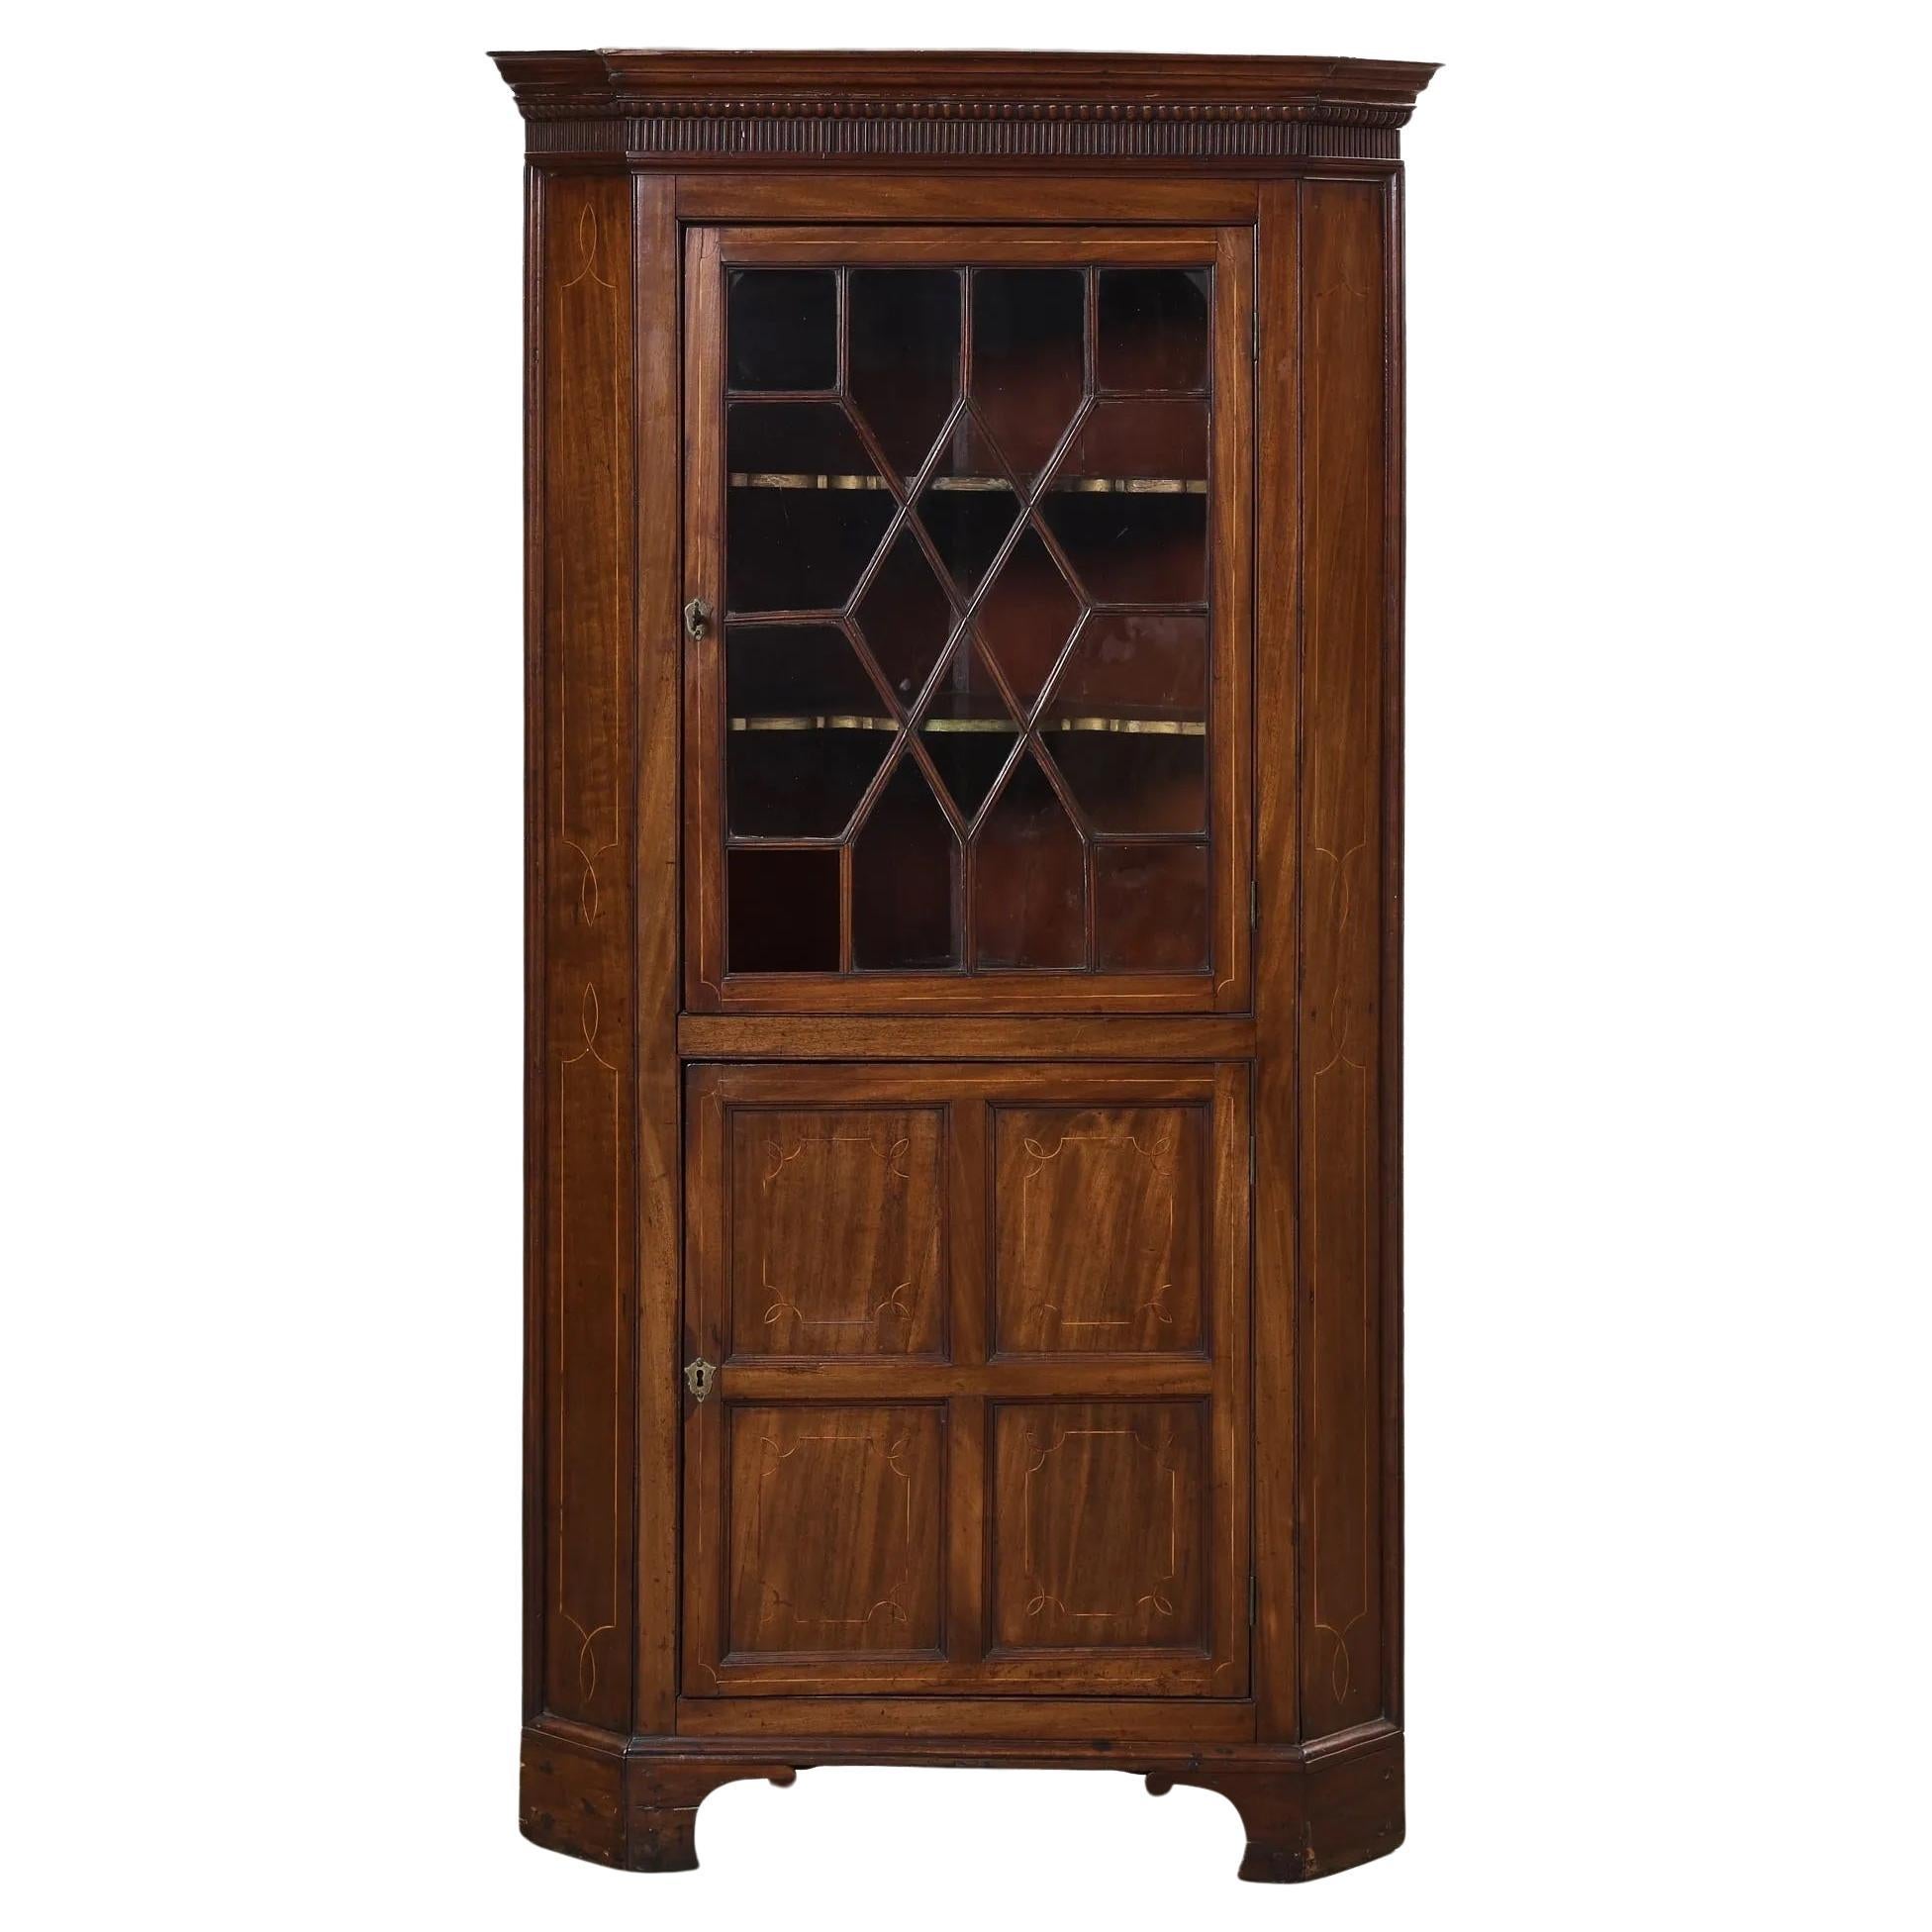 Late 1700's American Federal Inlaid Mahogany Corner Cabinet w/ Dentil Molding For Sale